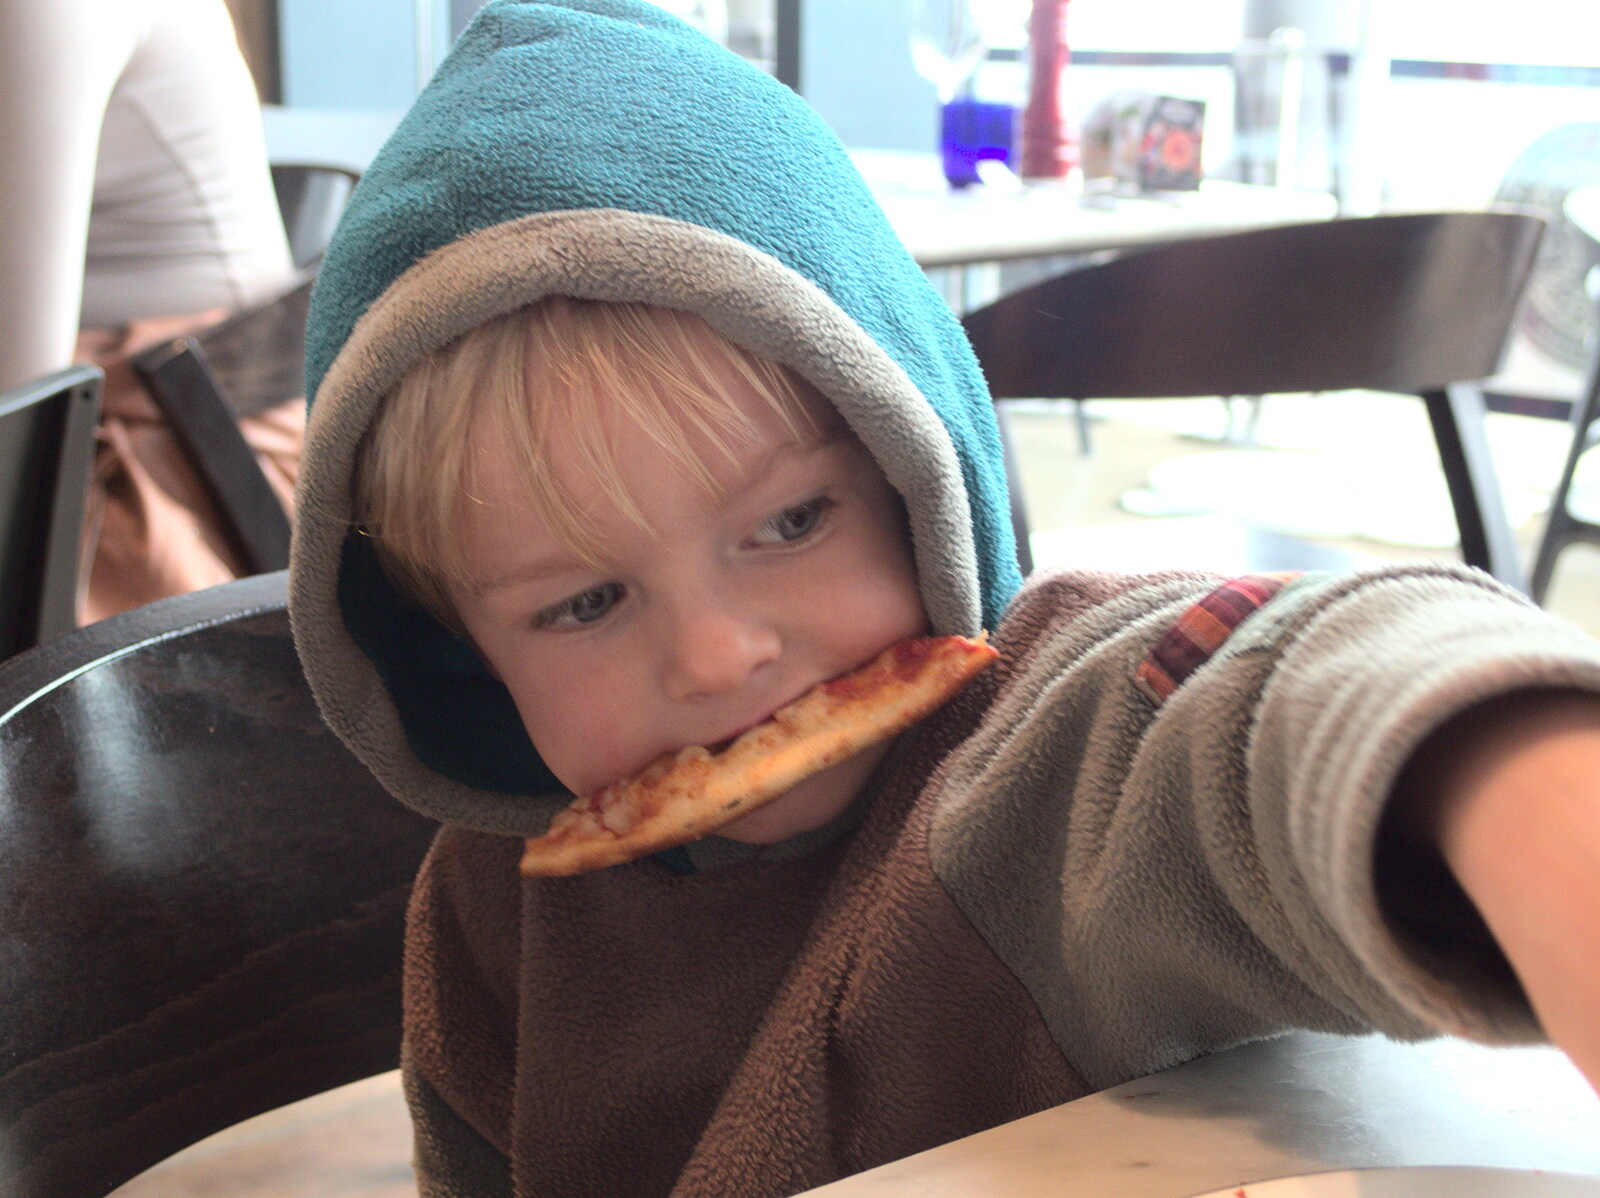 Harry chomps on a bit of pizza from Diss Kebabs and Pizza Express, Ipswich, Suffolk - 7th May 2015